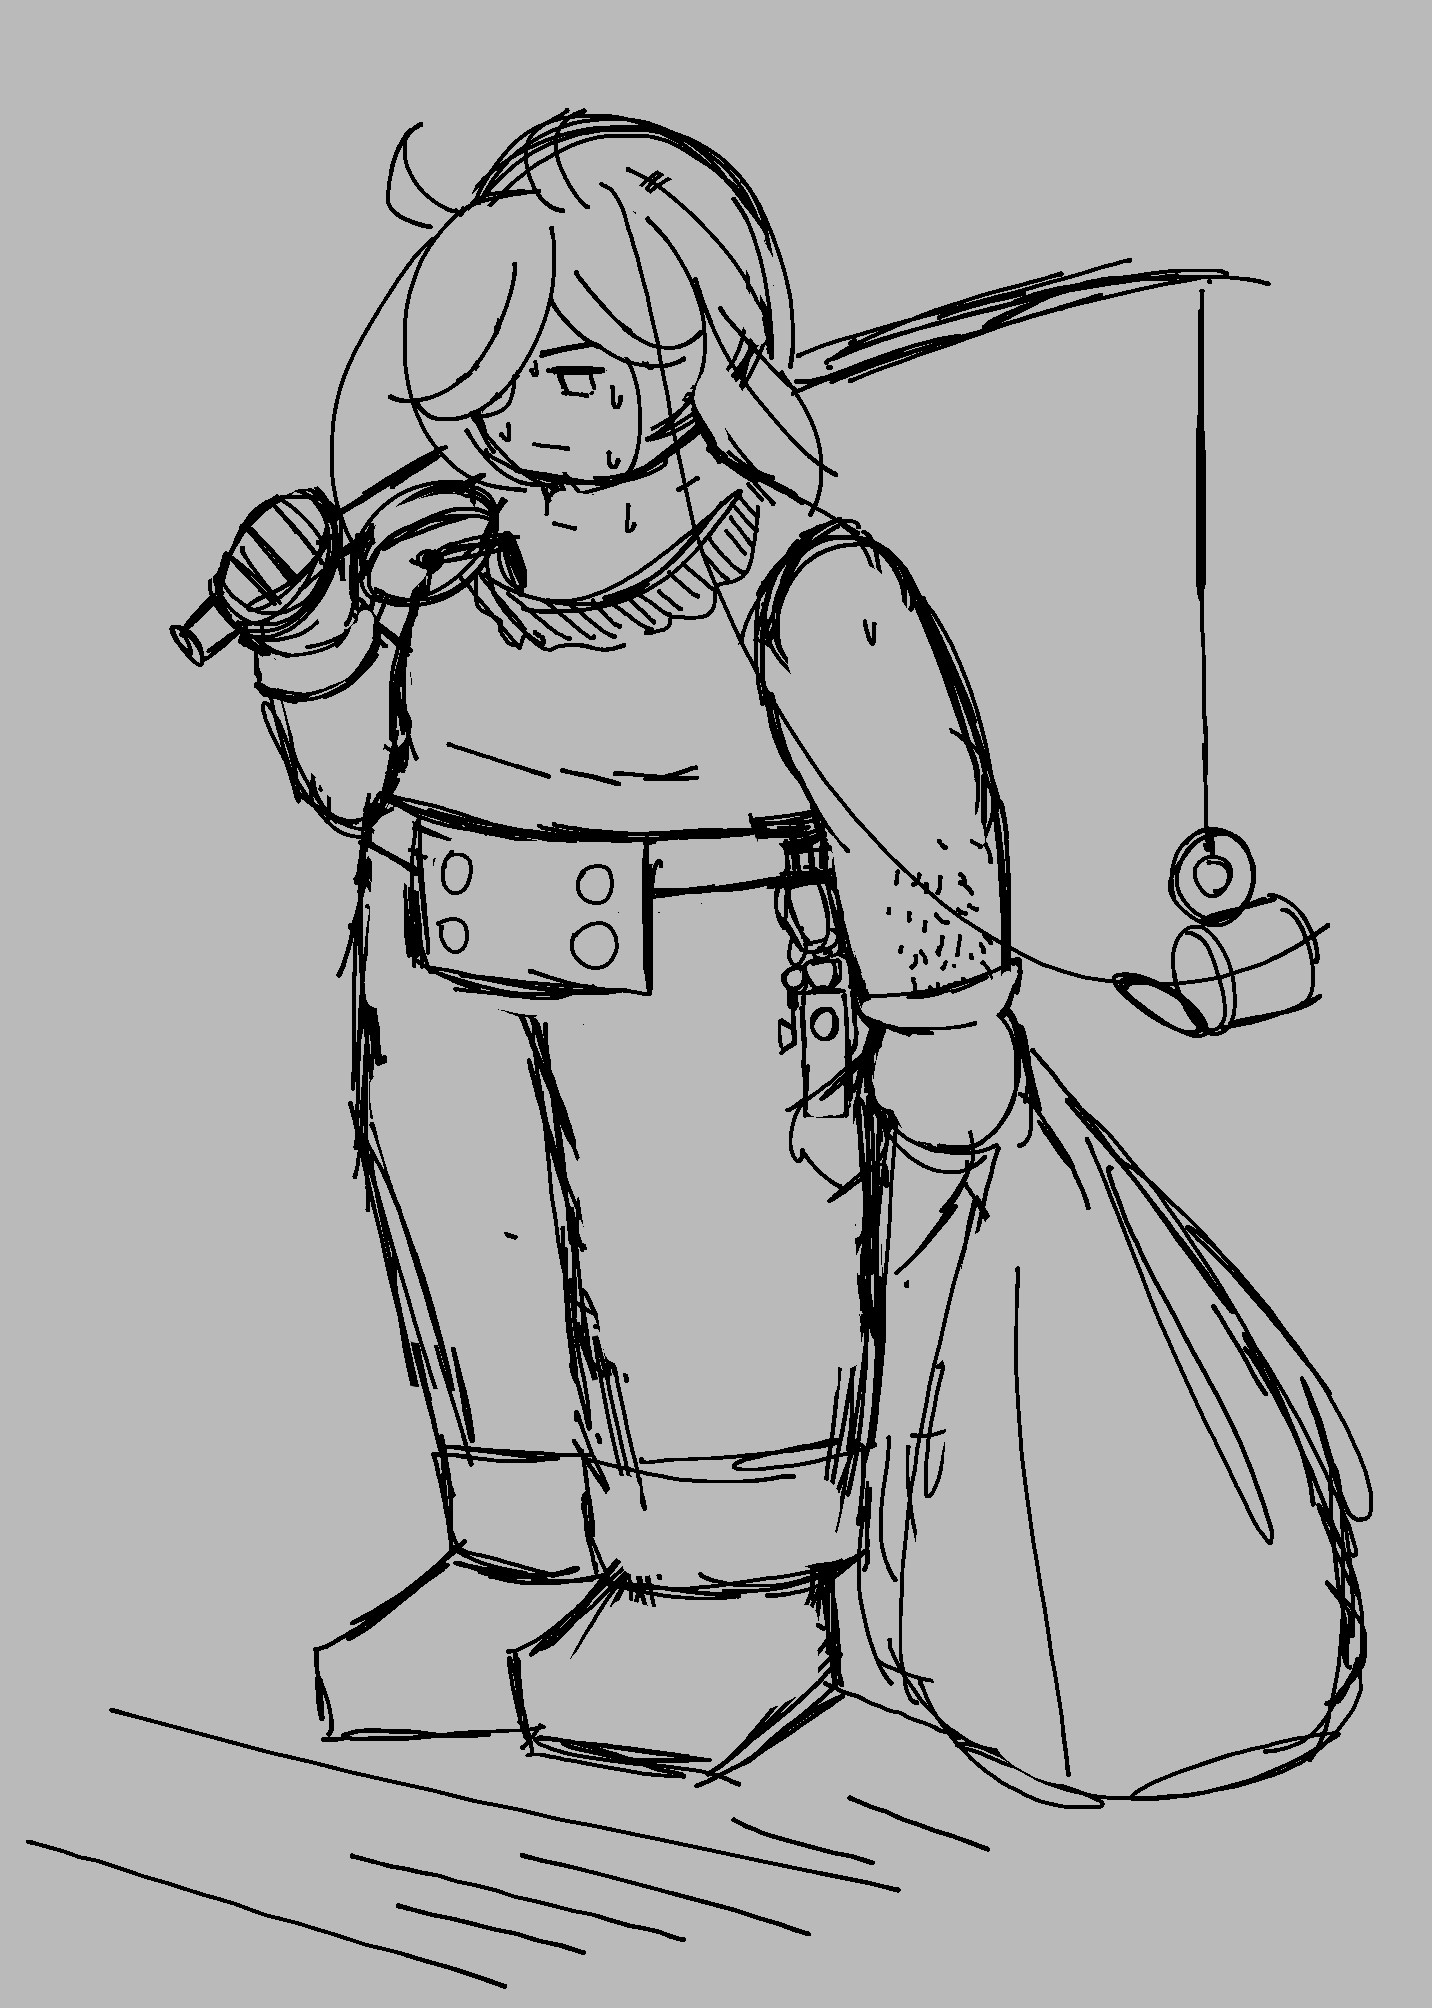 a sketch of pistol wearing a tank top, and holding a fishing rod and garbage bag. The fishing rod uses a magnet instead of a hook. An open can is stuck to the magnet